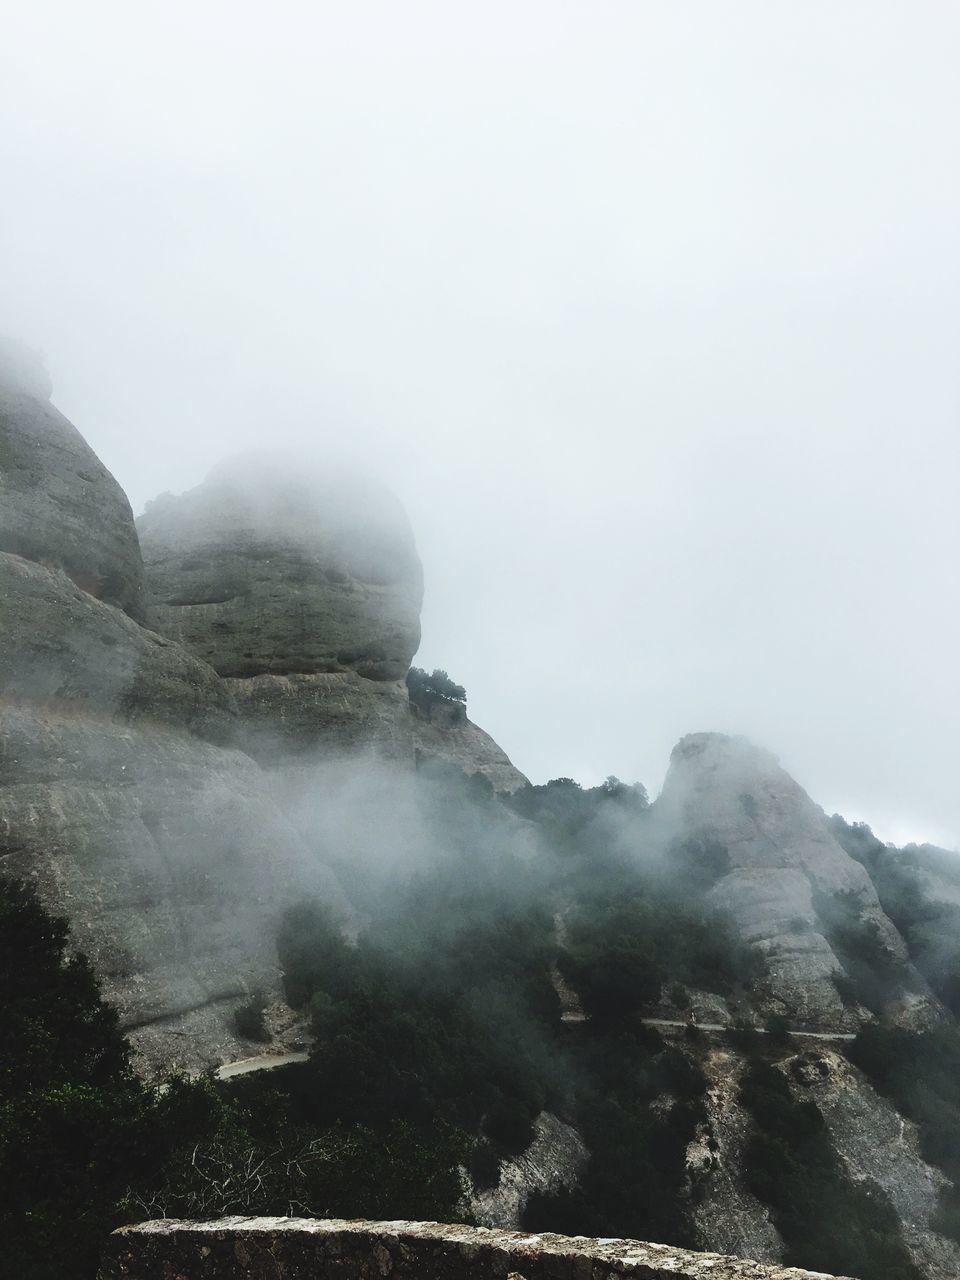 beauty in nature, nature, fog, mountain, day, outdoors, scenics, no people, tranquil scene, landscape, tranquility, physical geography, sky